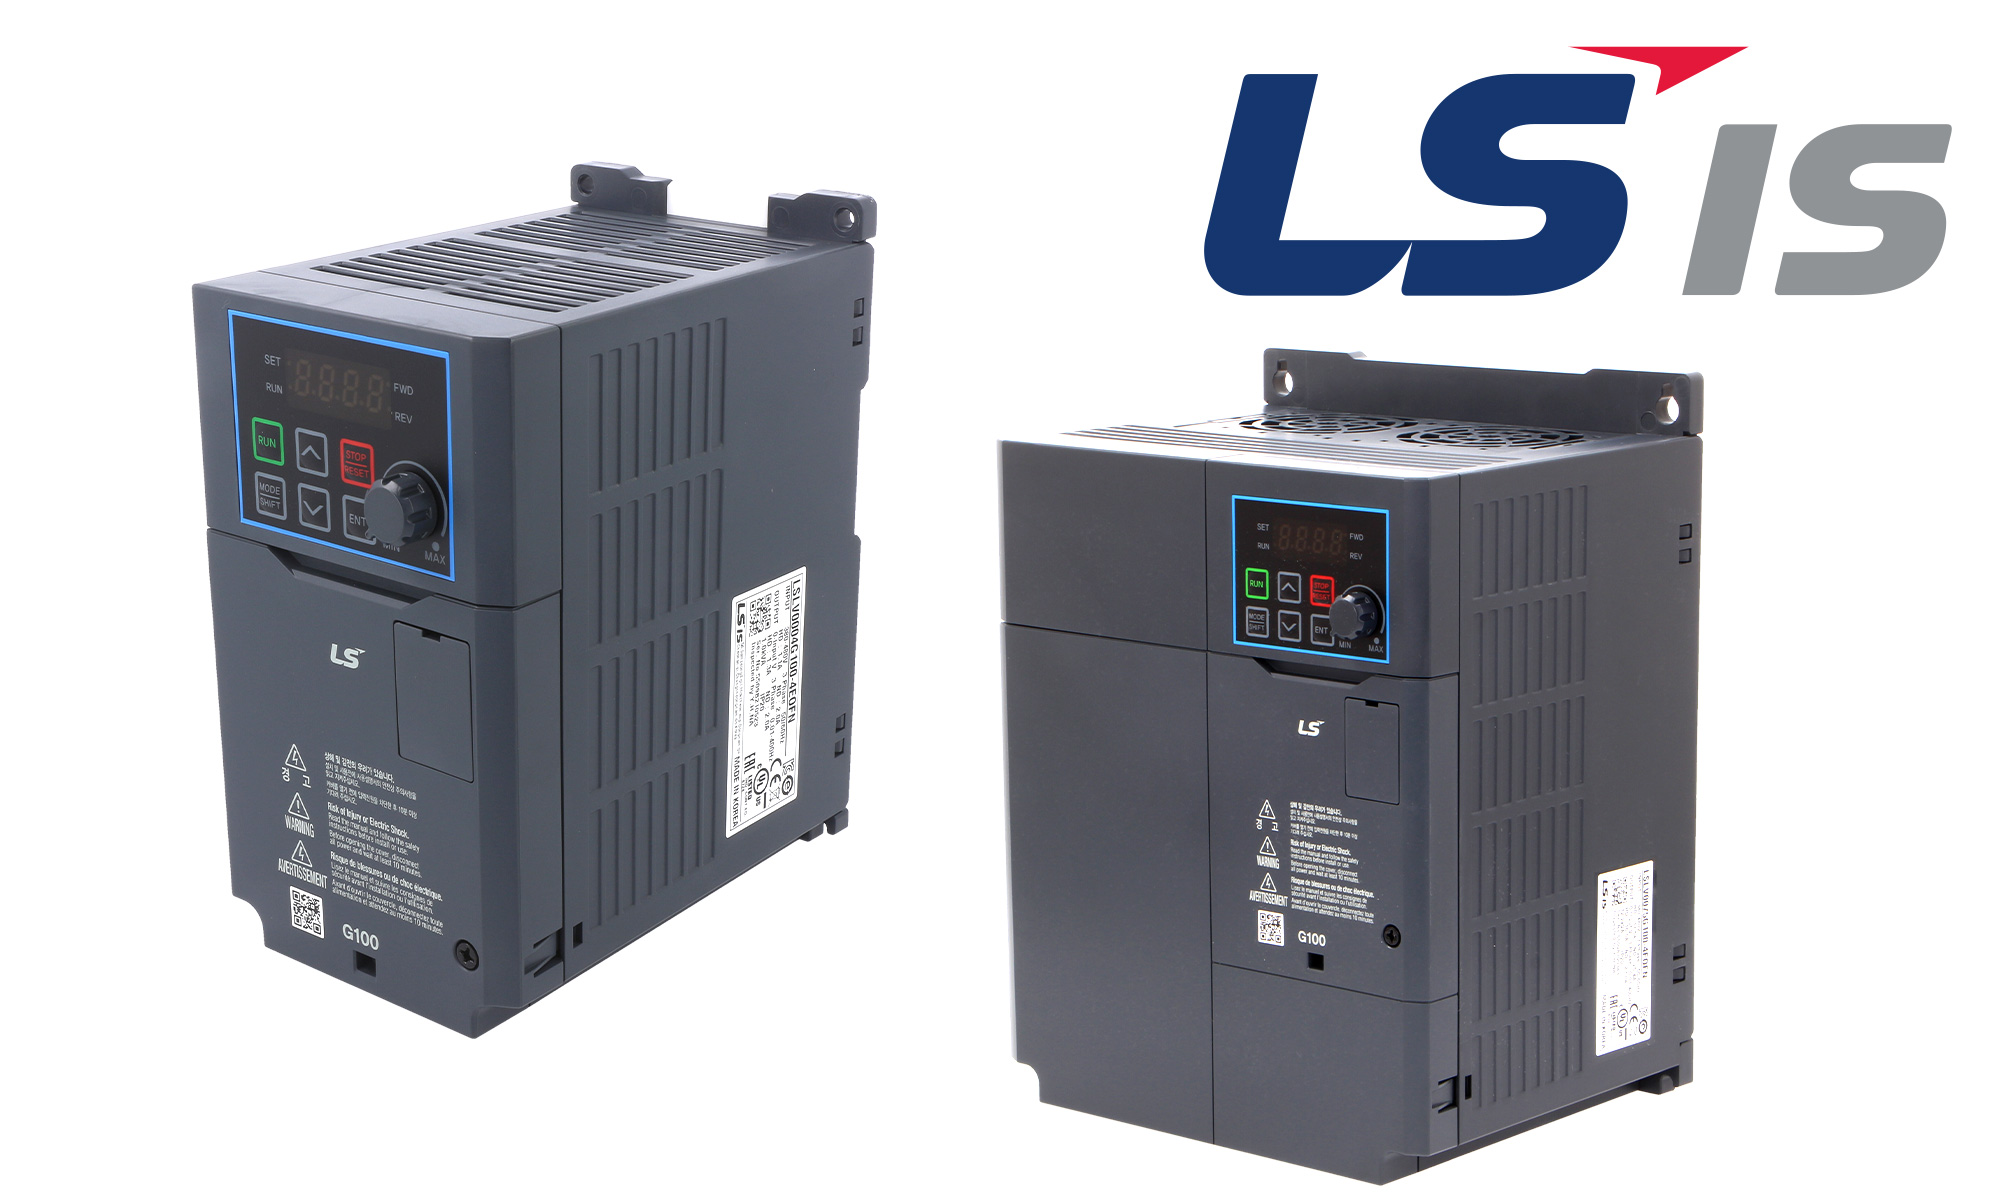 G100 series inverters from LS Industrial Systems